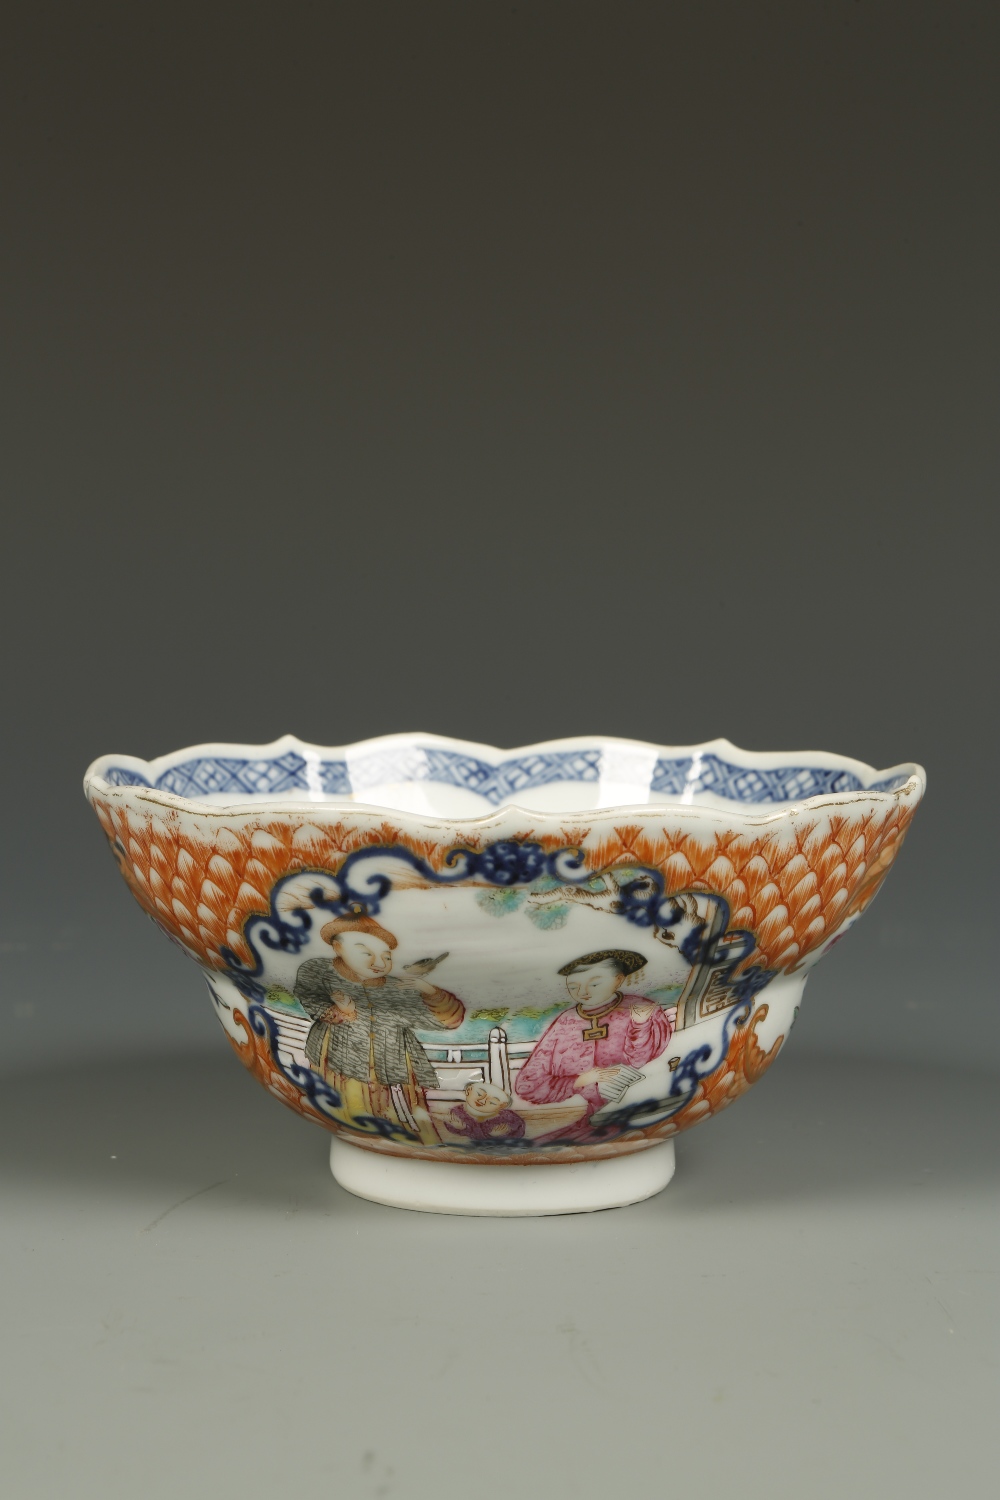 A FINE CHINESE FAMILLE ROSE OGEE BOWL, the exterior decorated with panels showing a lady smoking,